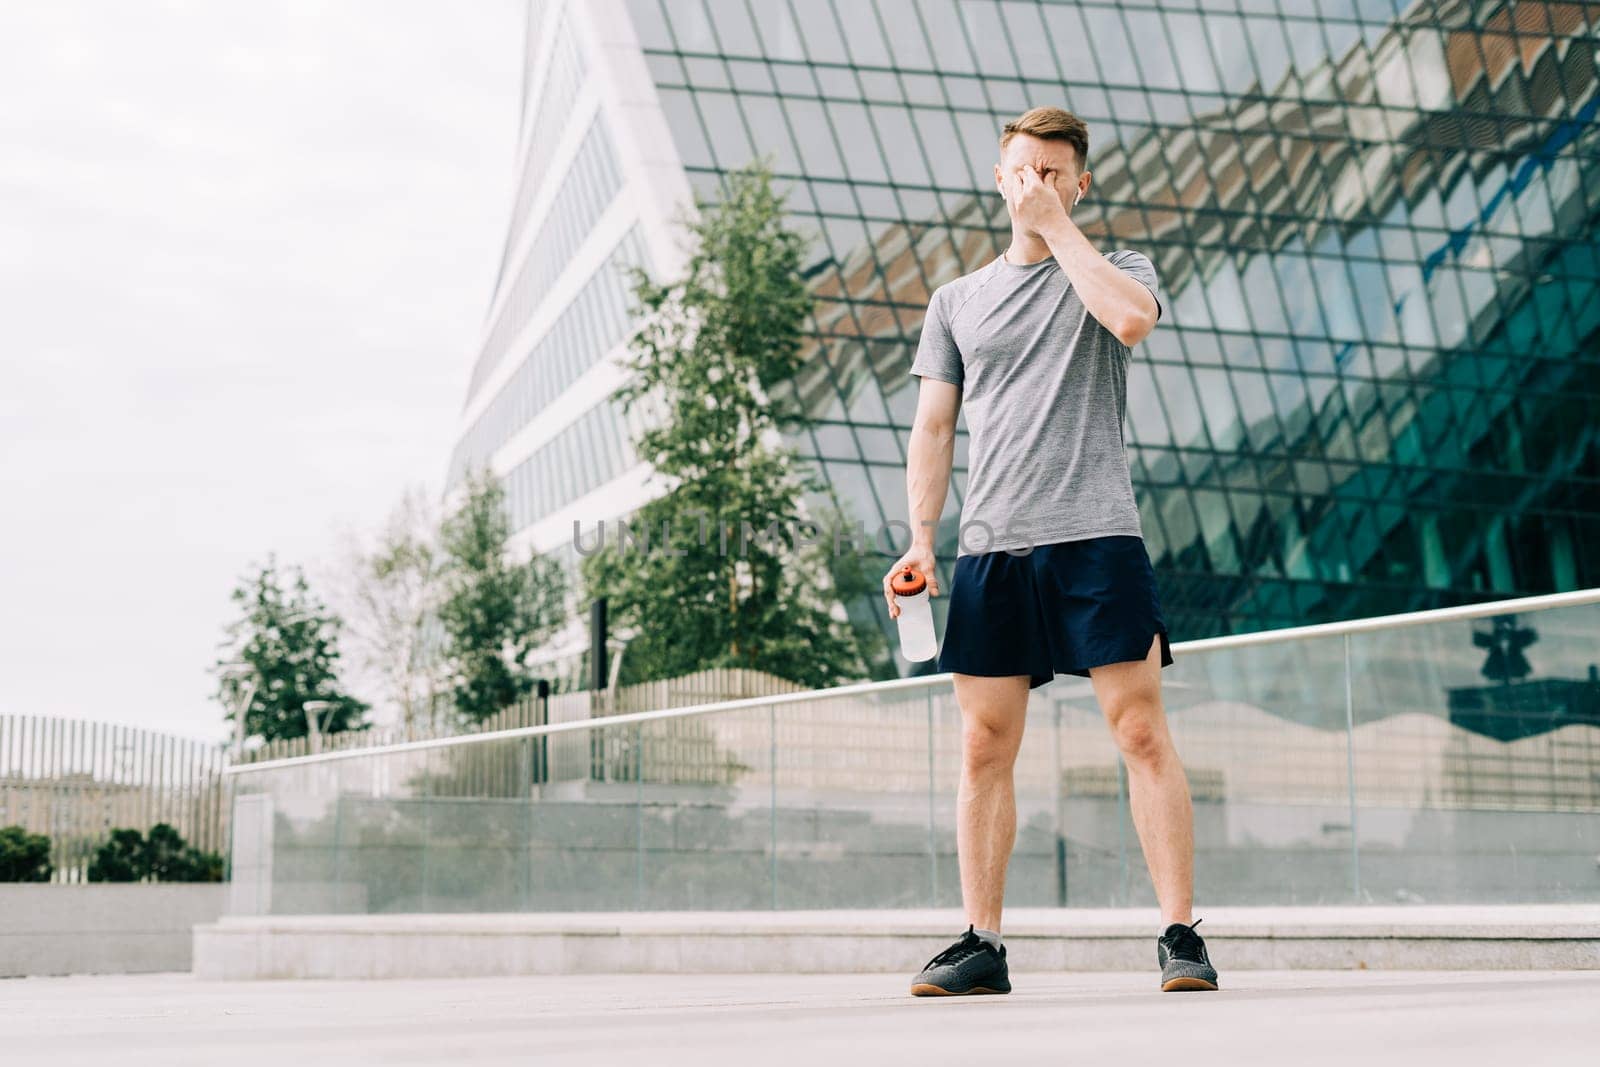 Tired Young man runner drinking water, relaxing after sport training. Holding water bottle while doing fitness workout in summer city urban street, cloudy sky. by Ostanina